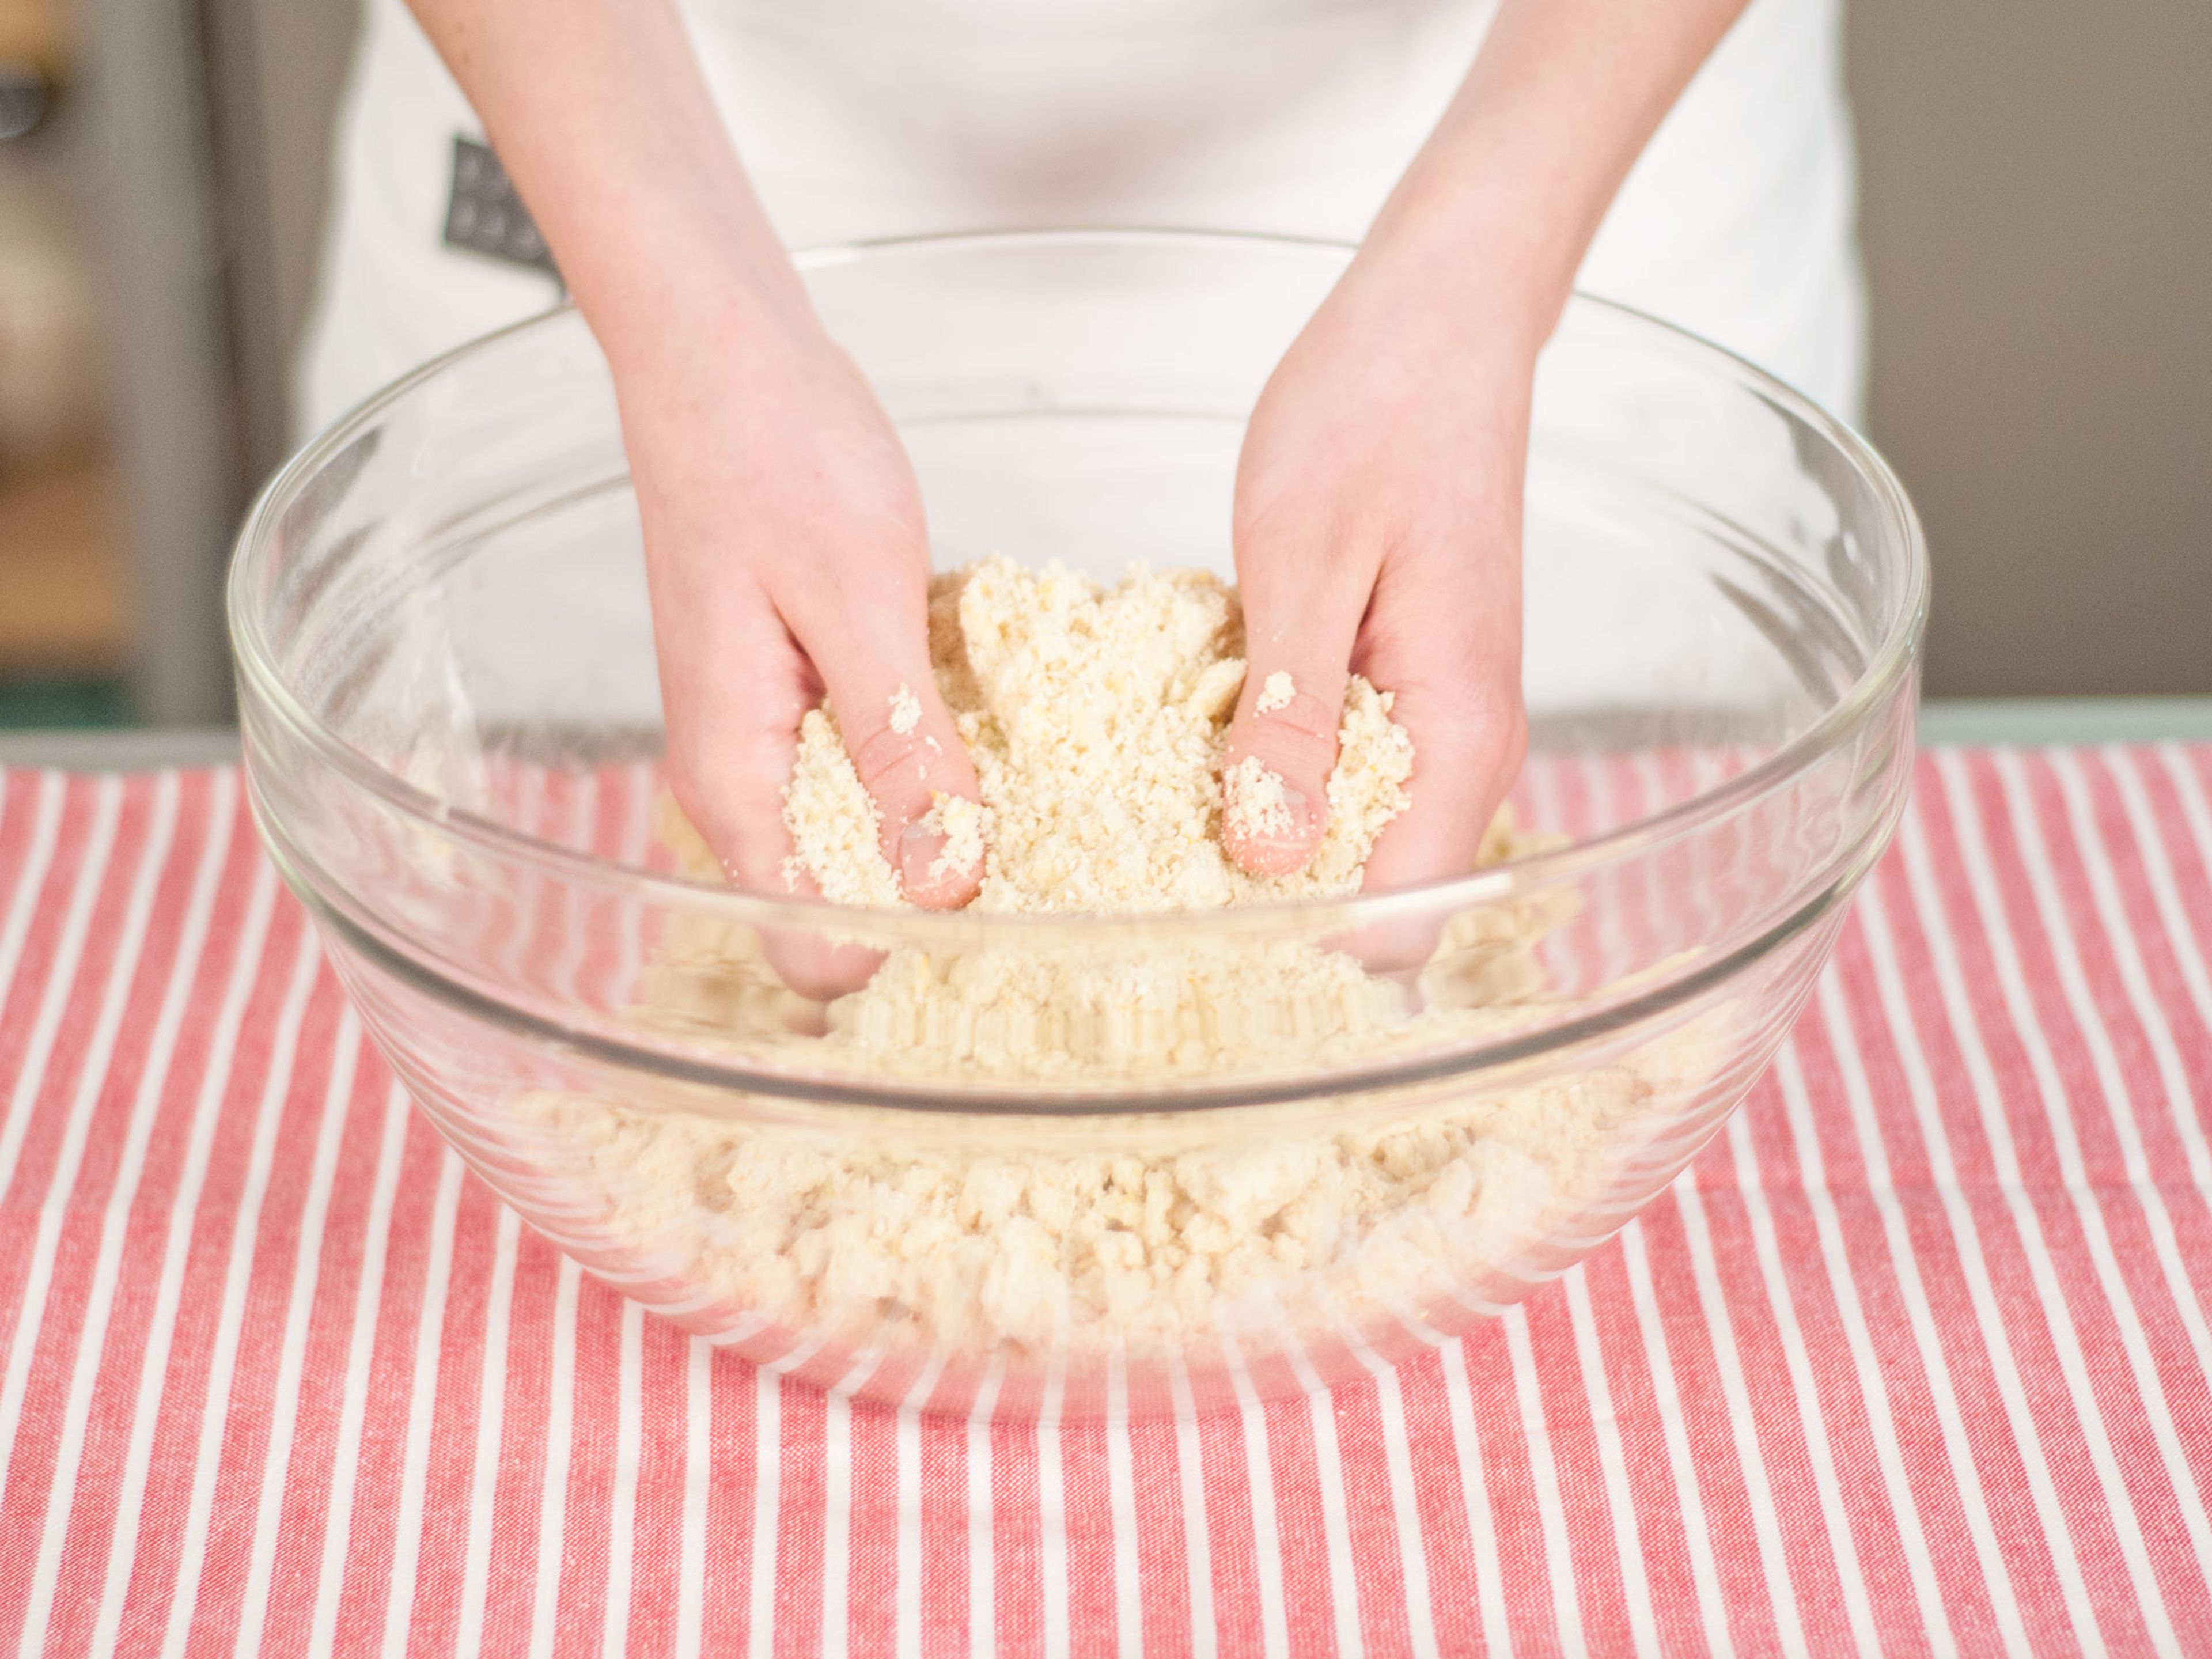 Roughly mix crumble topping using your hands.